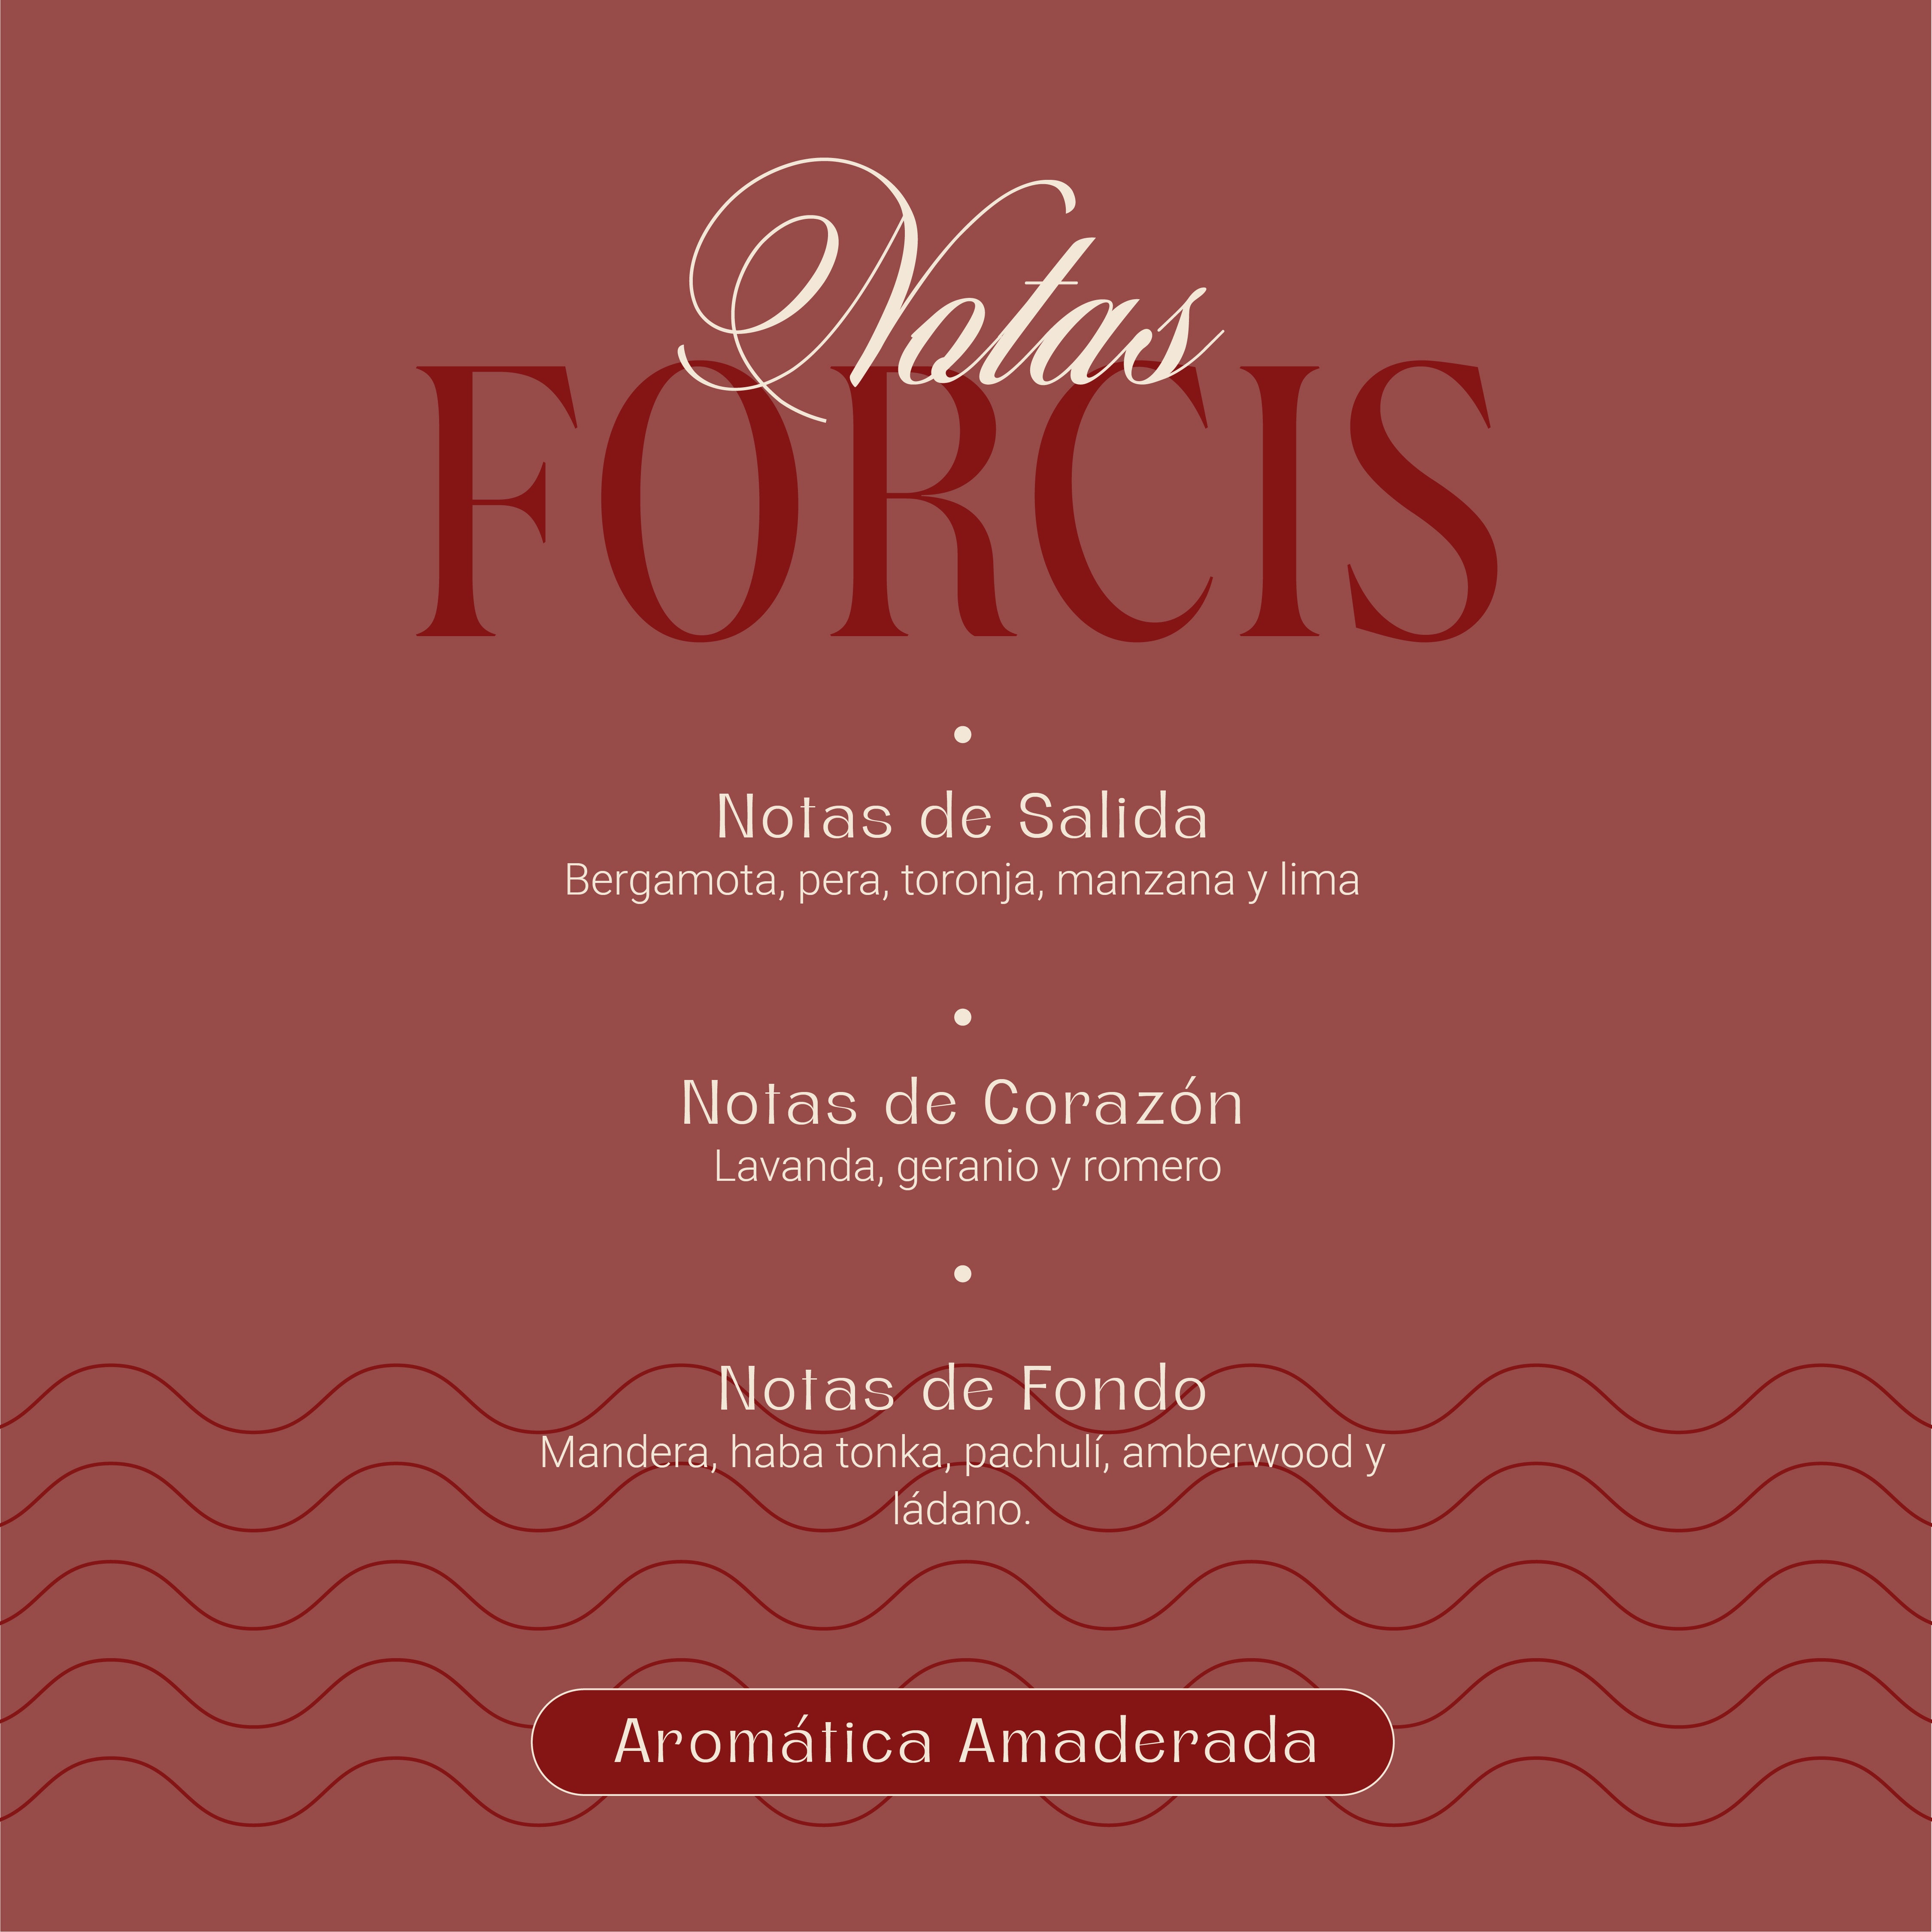 Forcis